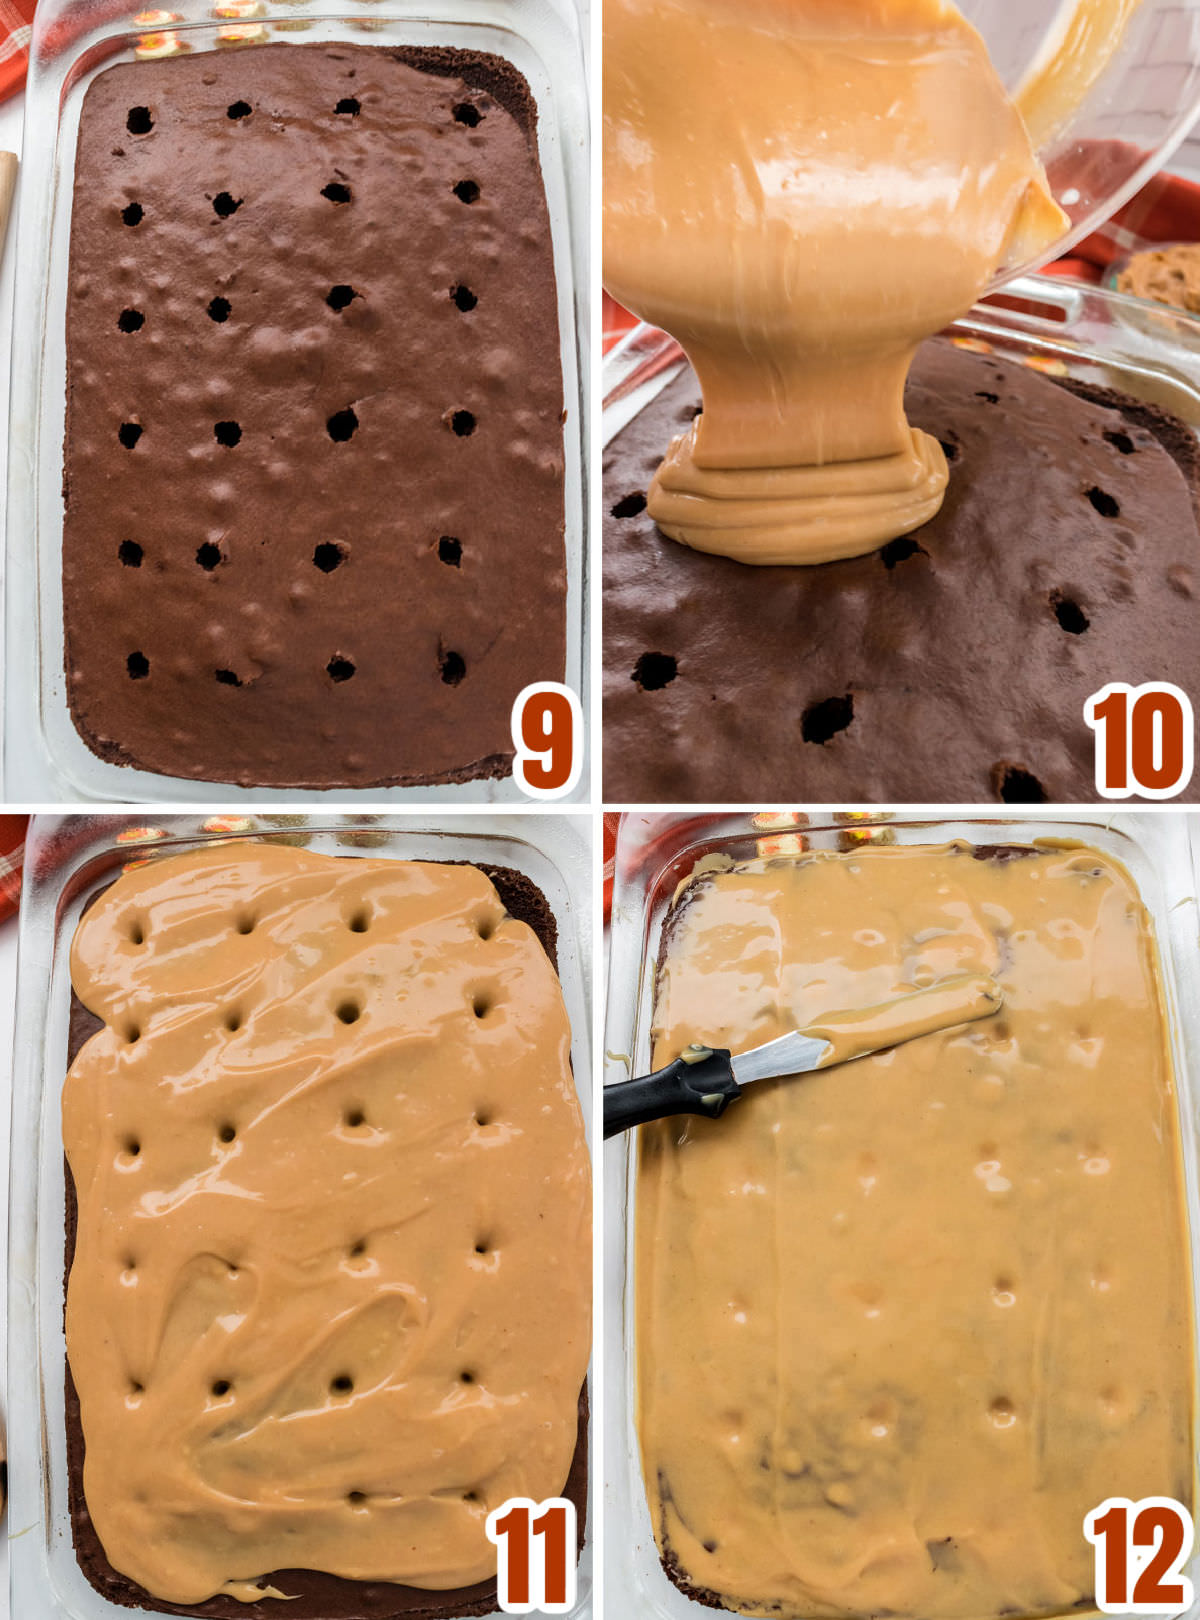 Collage image showing the steps for adding the Peanut Butter Filling to the chocolate poke cake.